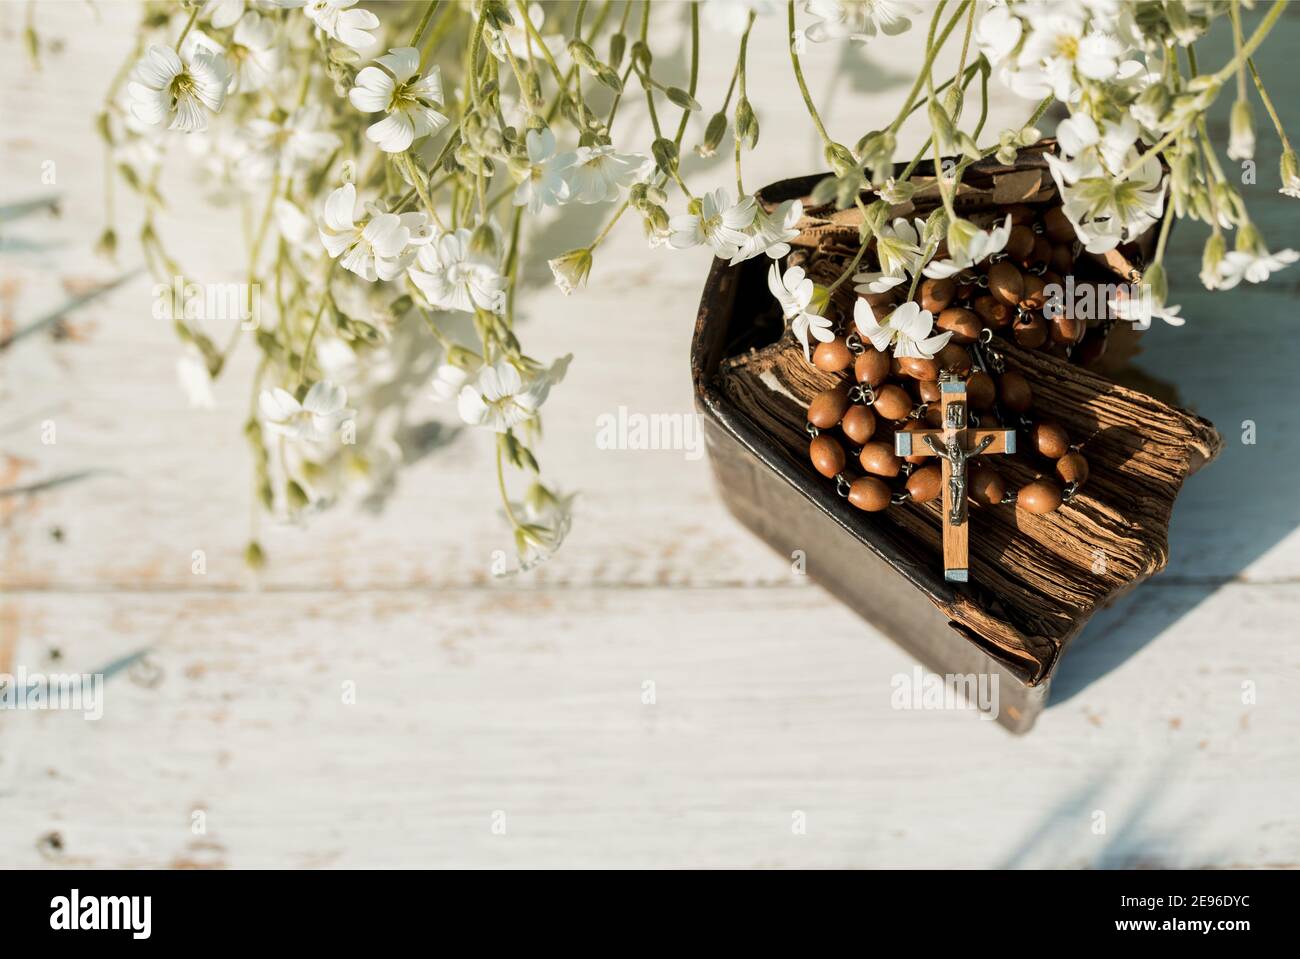 Hands folded in prayer over old Holy Bible. Wooden background.Hands and rosary, prayer, book with yellow pages. white flowers on a background. in the Stock Photo